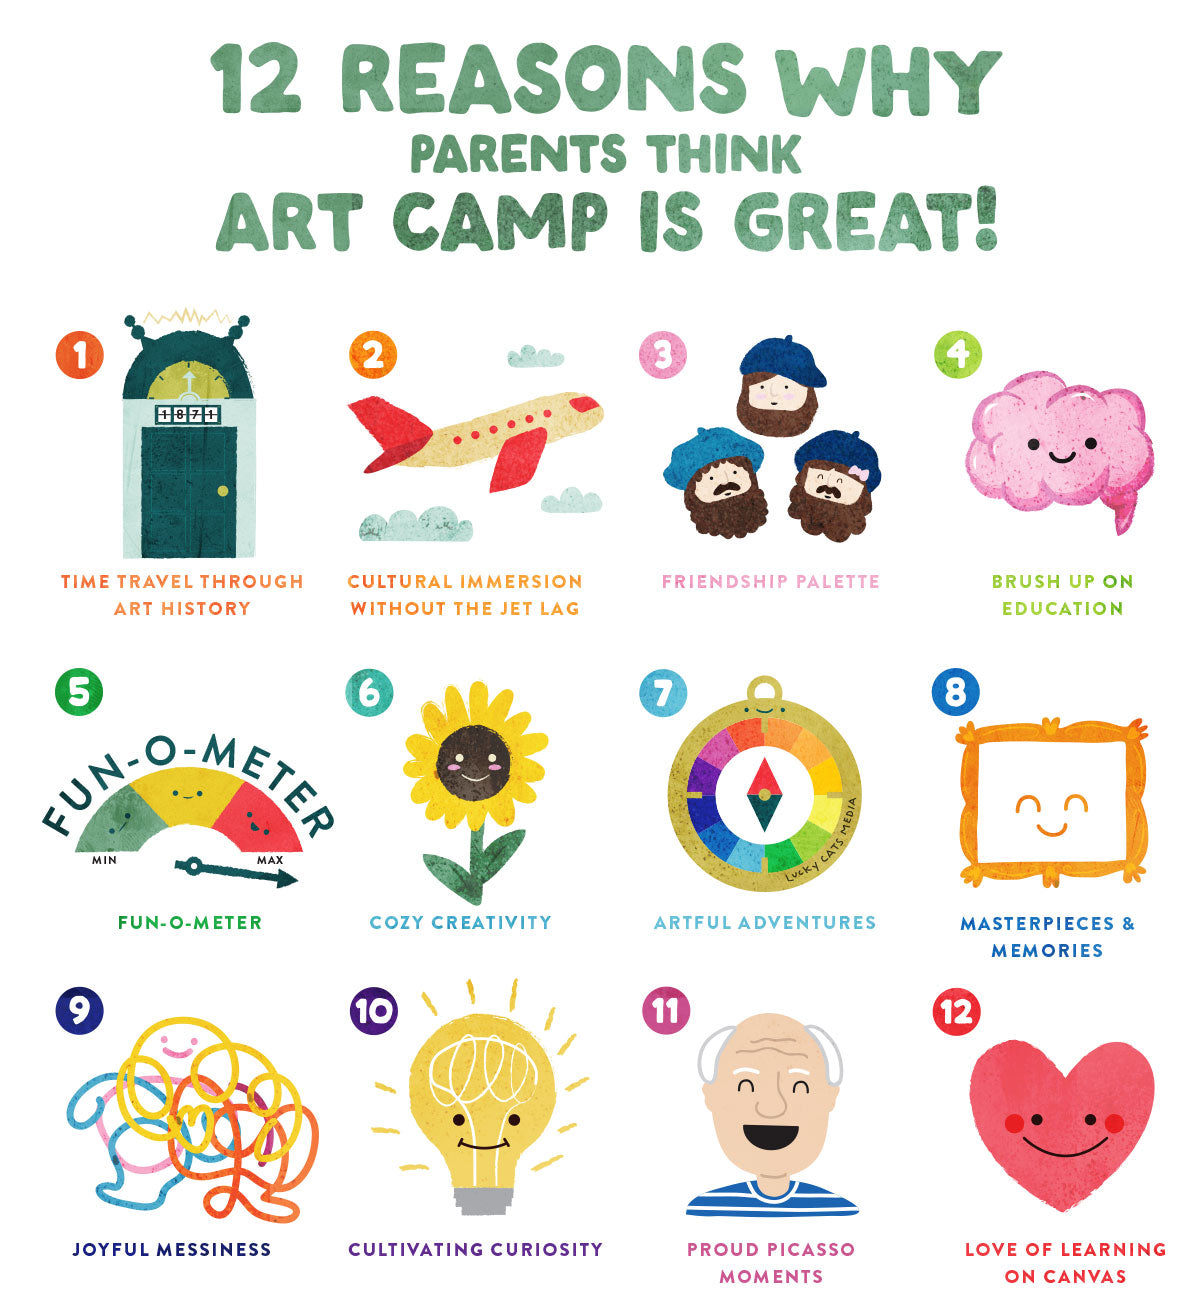 12 Reasons Why Parents Think ART CAMP Is Great!